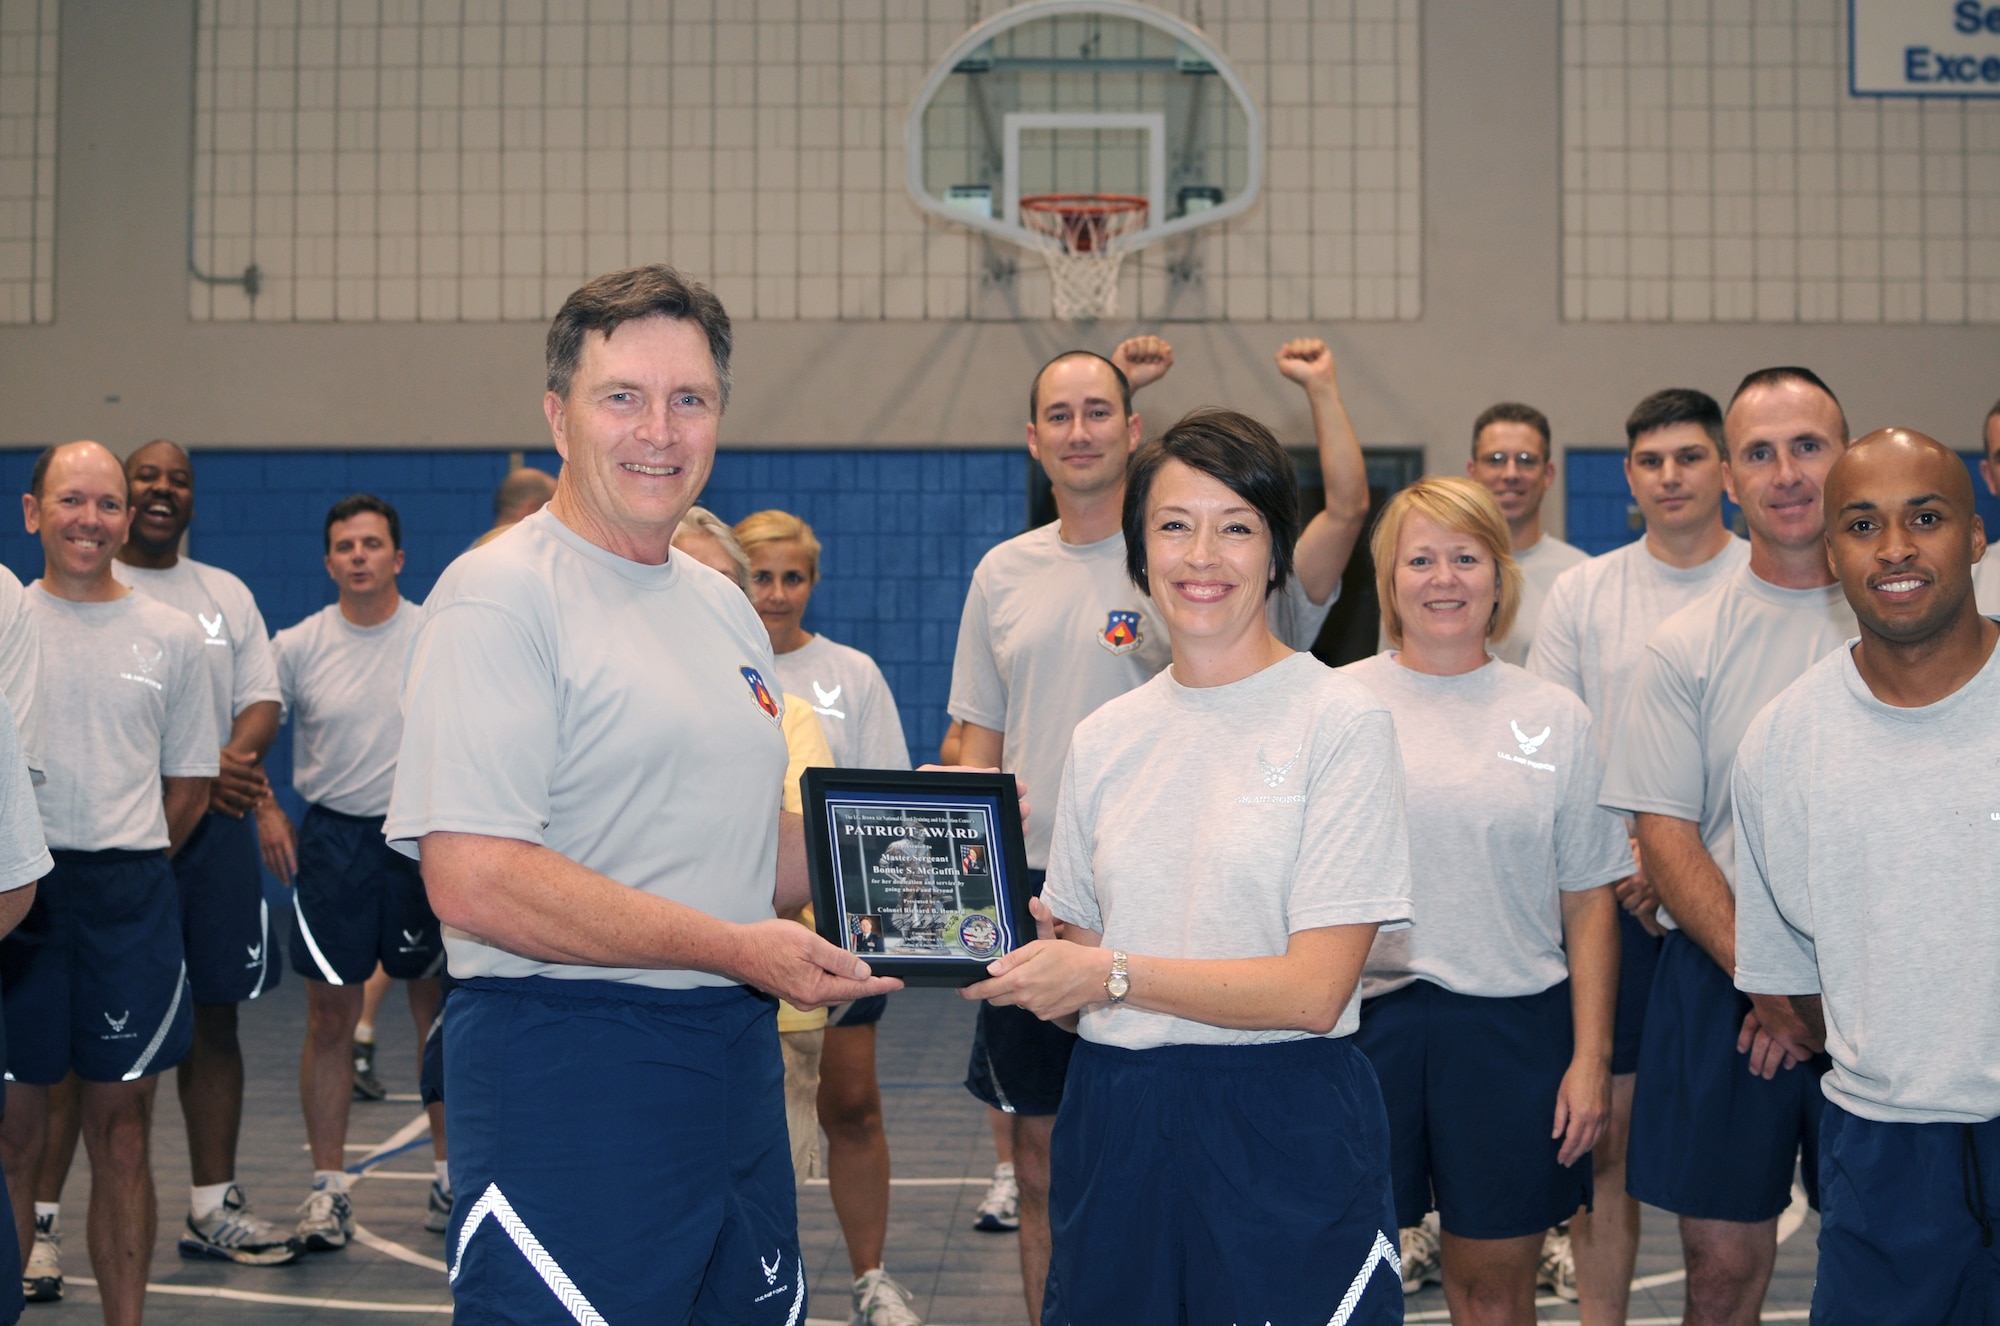 McGHEE TYSON AIR NATIONAL GUARD BASE, Tenn. -- Master Sgt. Bonnie S. McGuffin, EPME instructor, right, receives the TEC Patriot Award from Col. Richard B. Howard, commander, left, during the commander's monthly fitness training session at Wilson Hall on the campus of The I.G. Brown Air National Guard Training and Education Center here, July 28, 2010.  (U.S. Air Force photo by Master Sgt. Kurt Skoglund/Released)